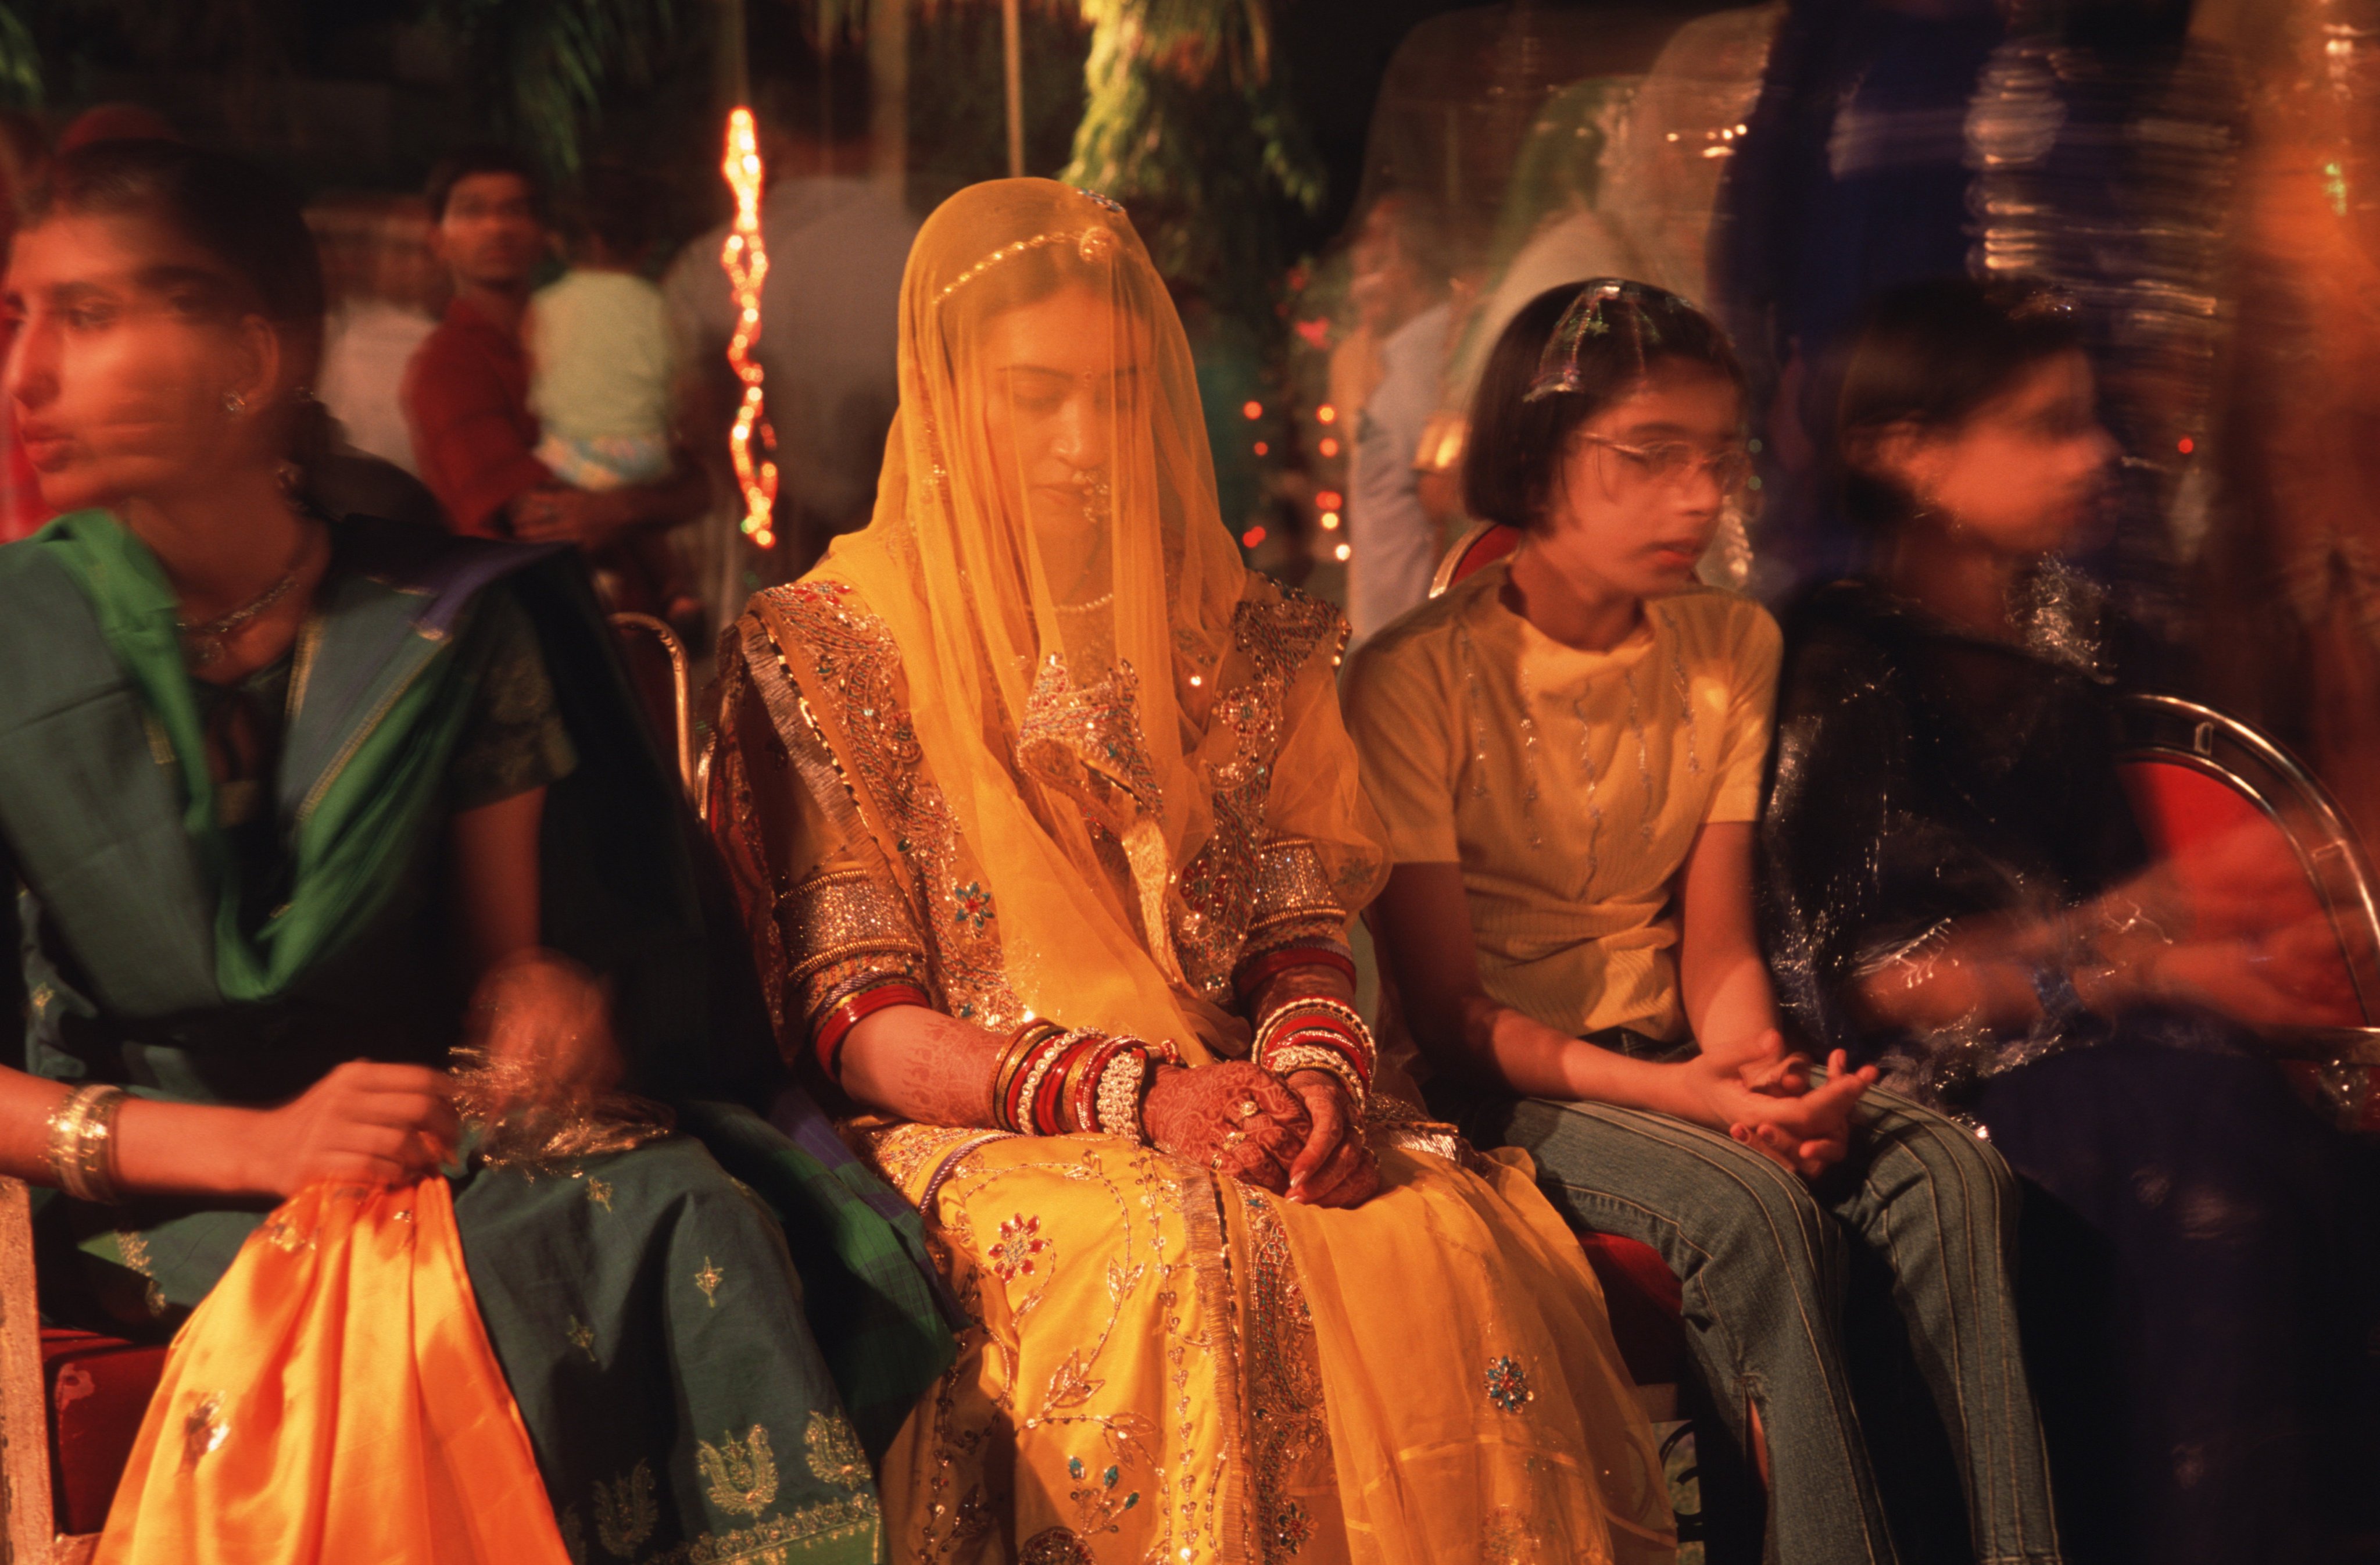 An India bride sits during her marriage ceremony. Photo: Getty Images